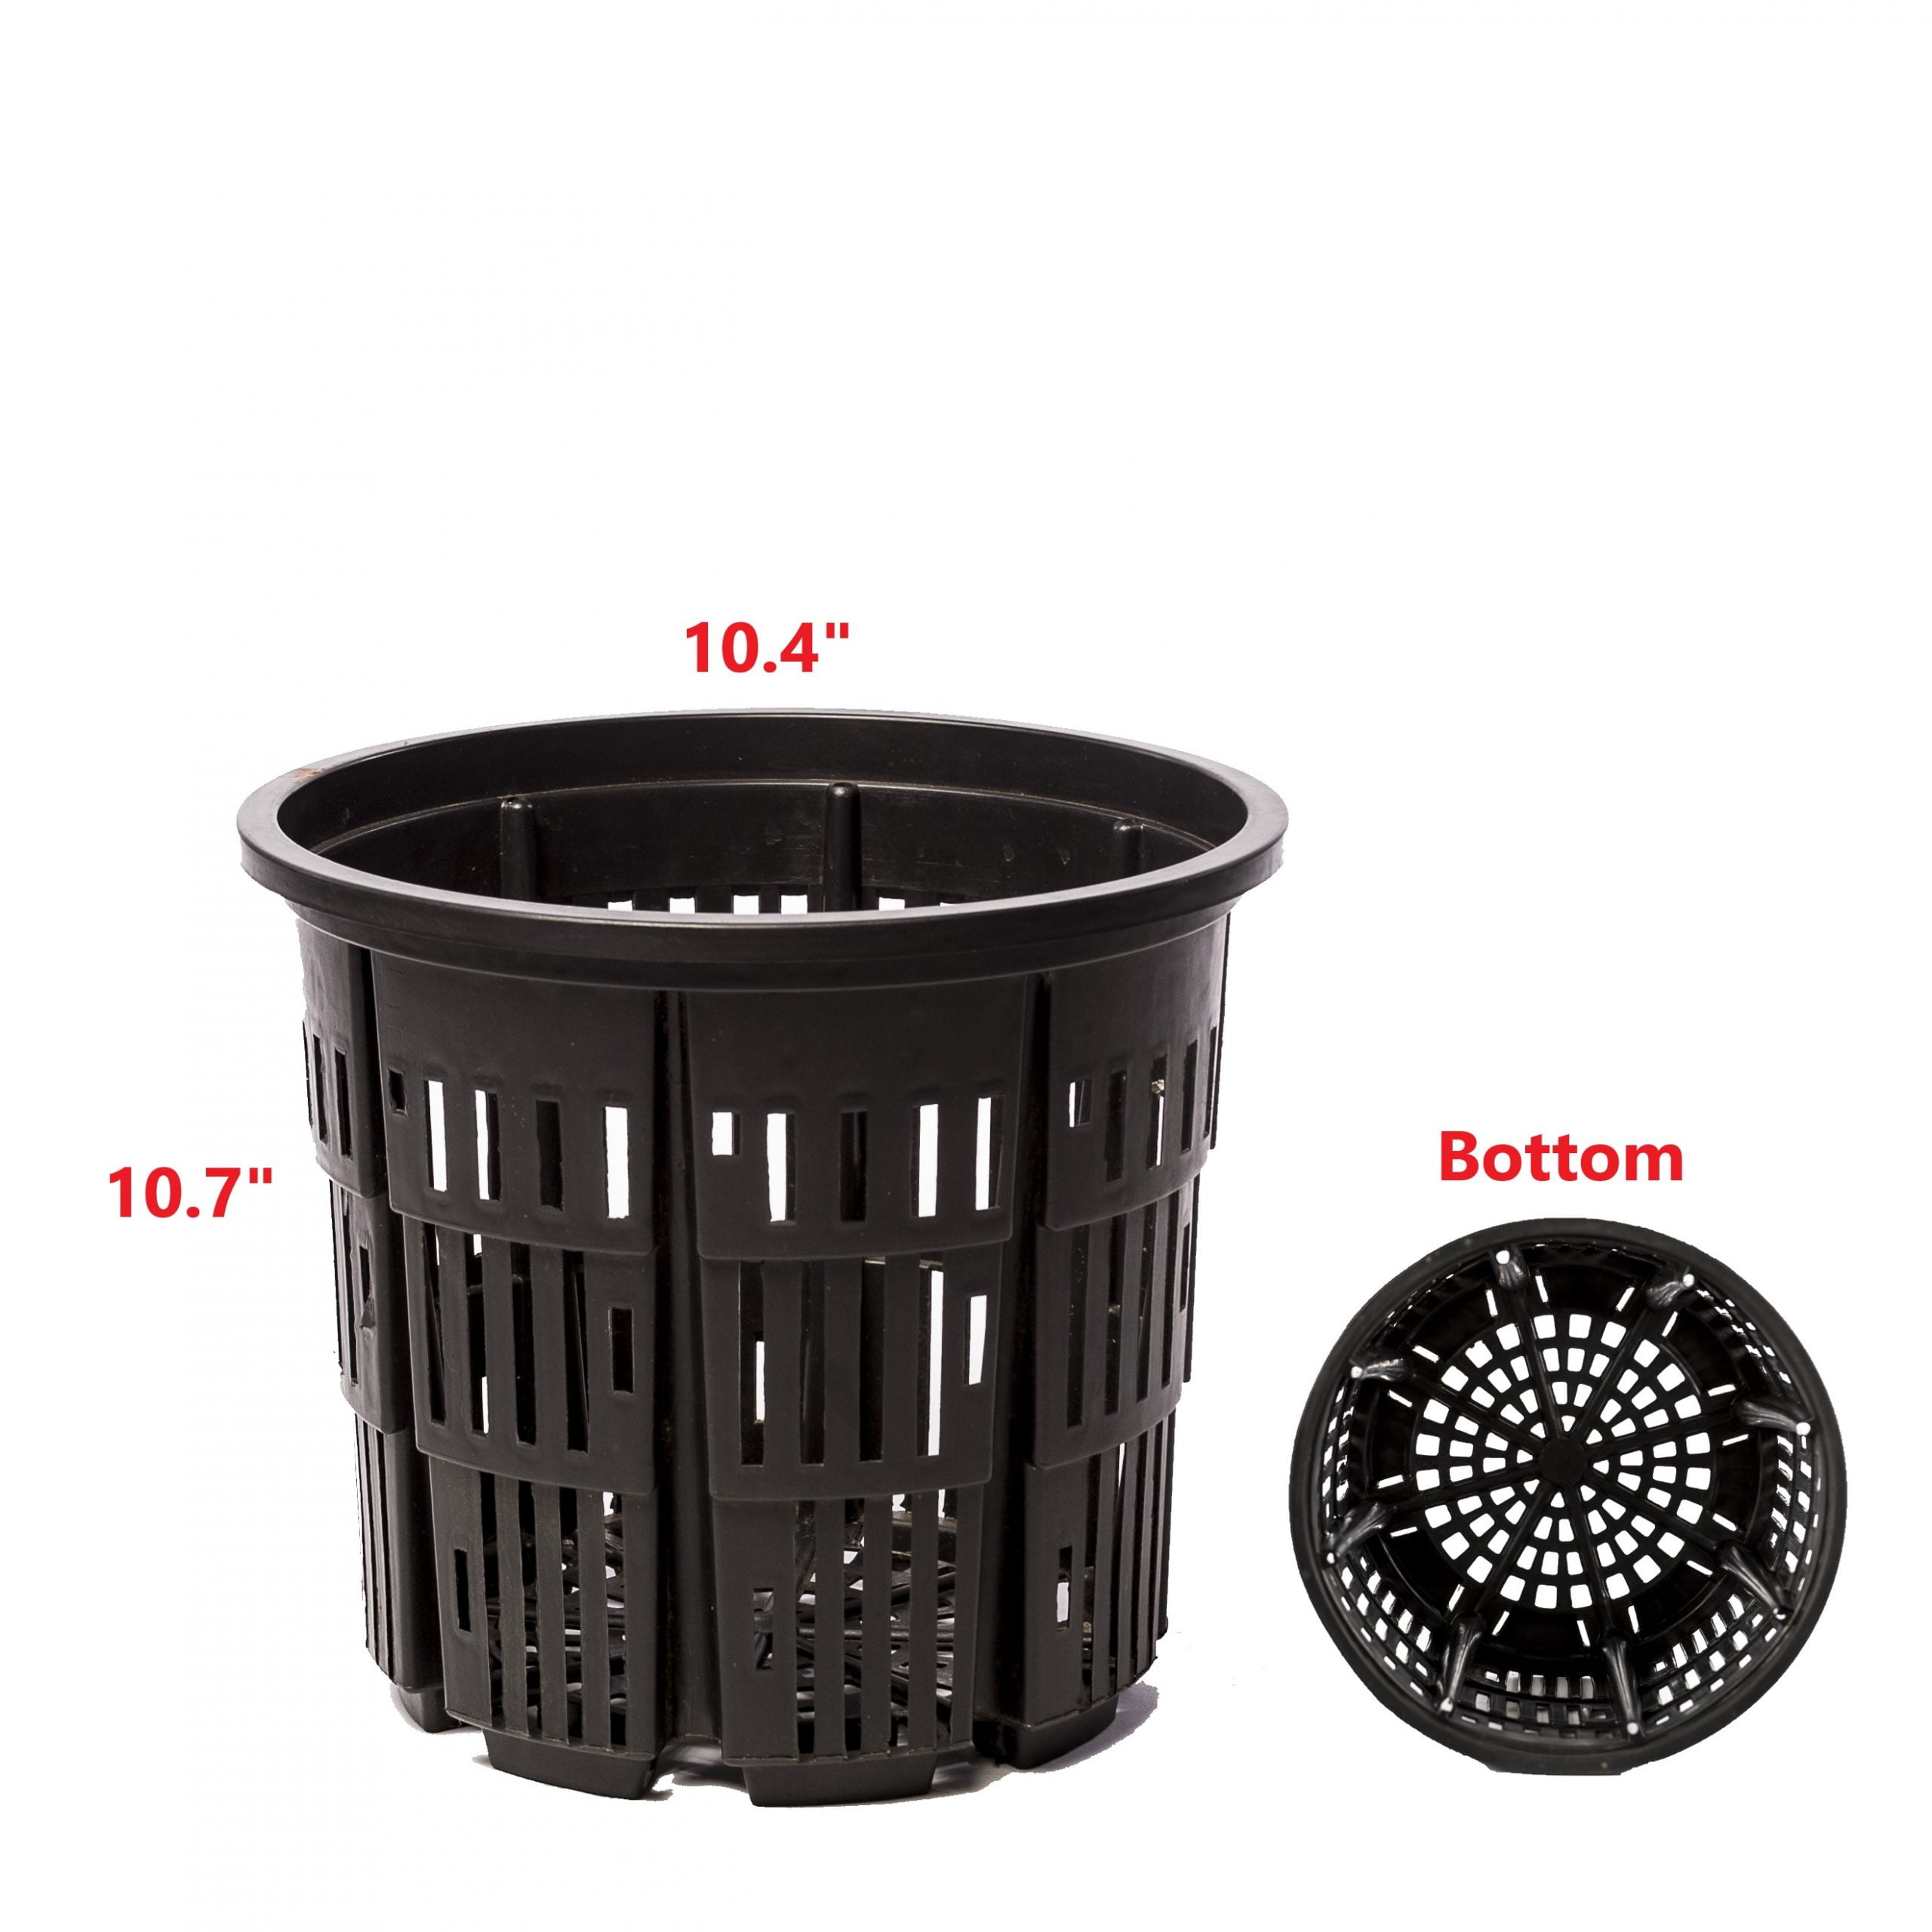 Superoots Air-Pot Air Pruning Garden Containers Product Review  